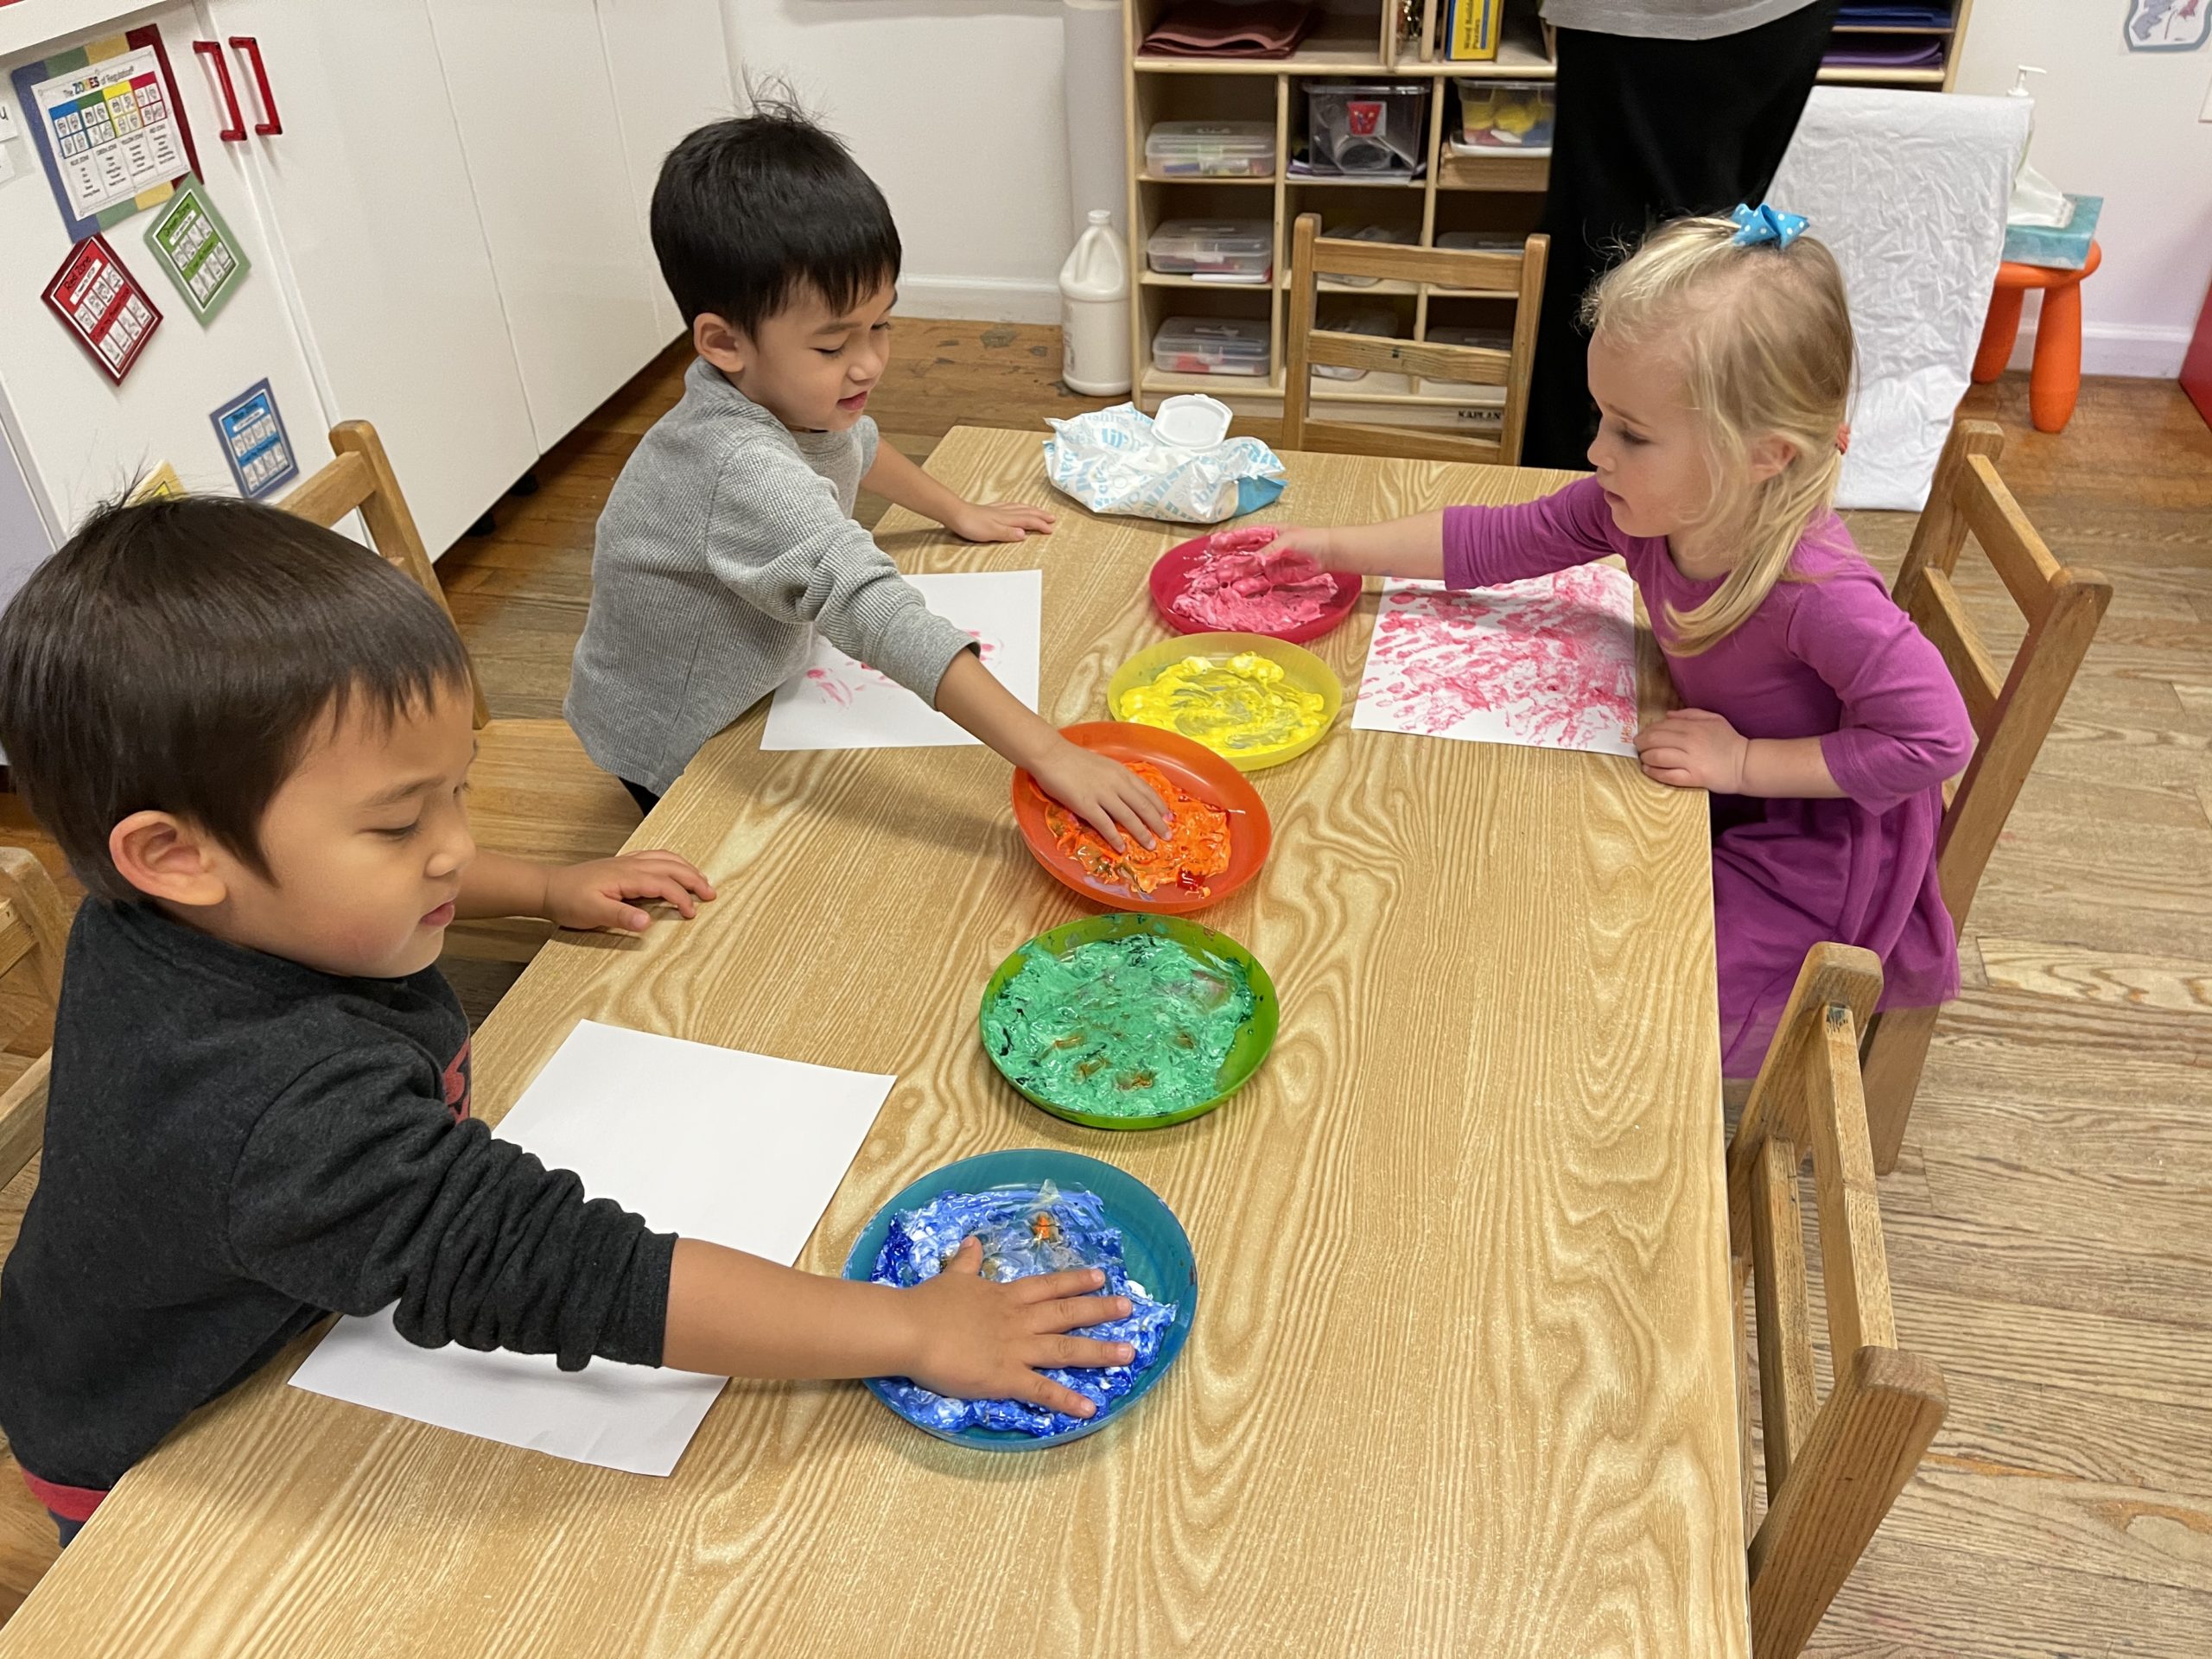 Children dipping their hands in color paint to make finger paintings